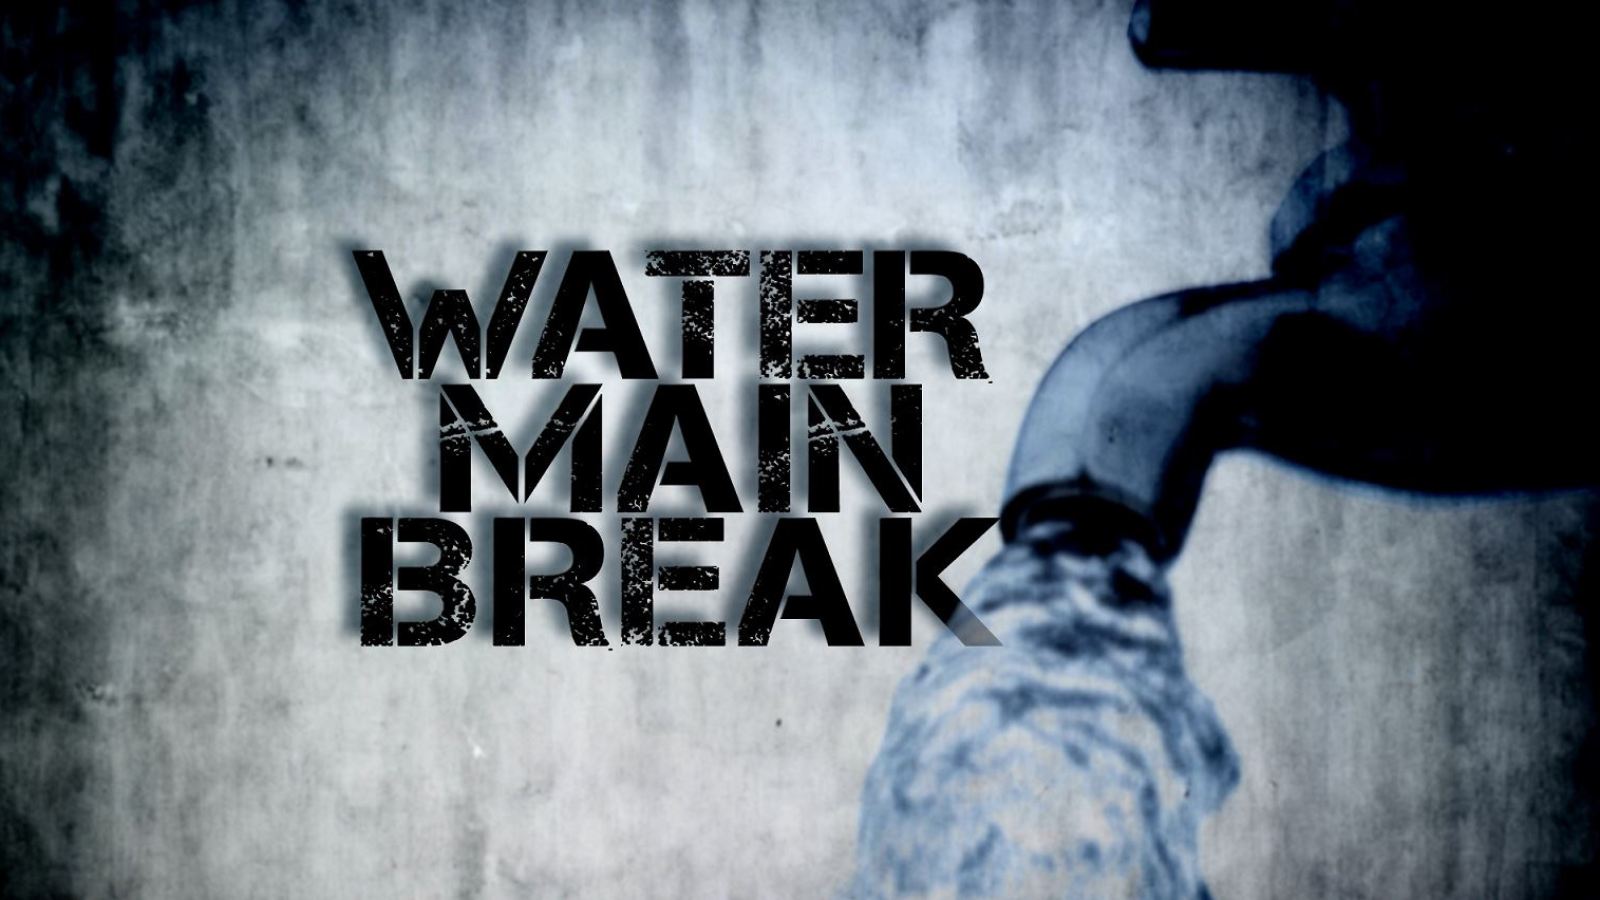 Water main break in Henrico causes multiple homes to lose water service